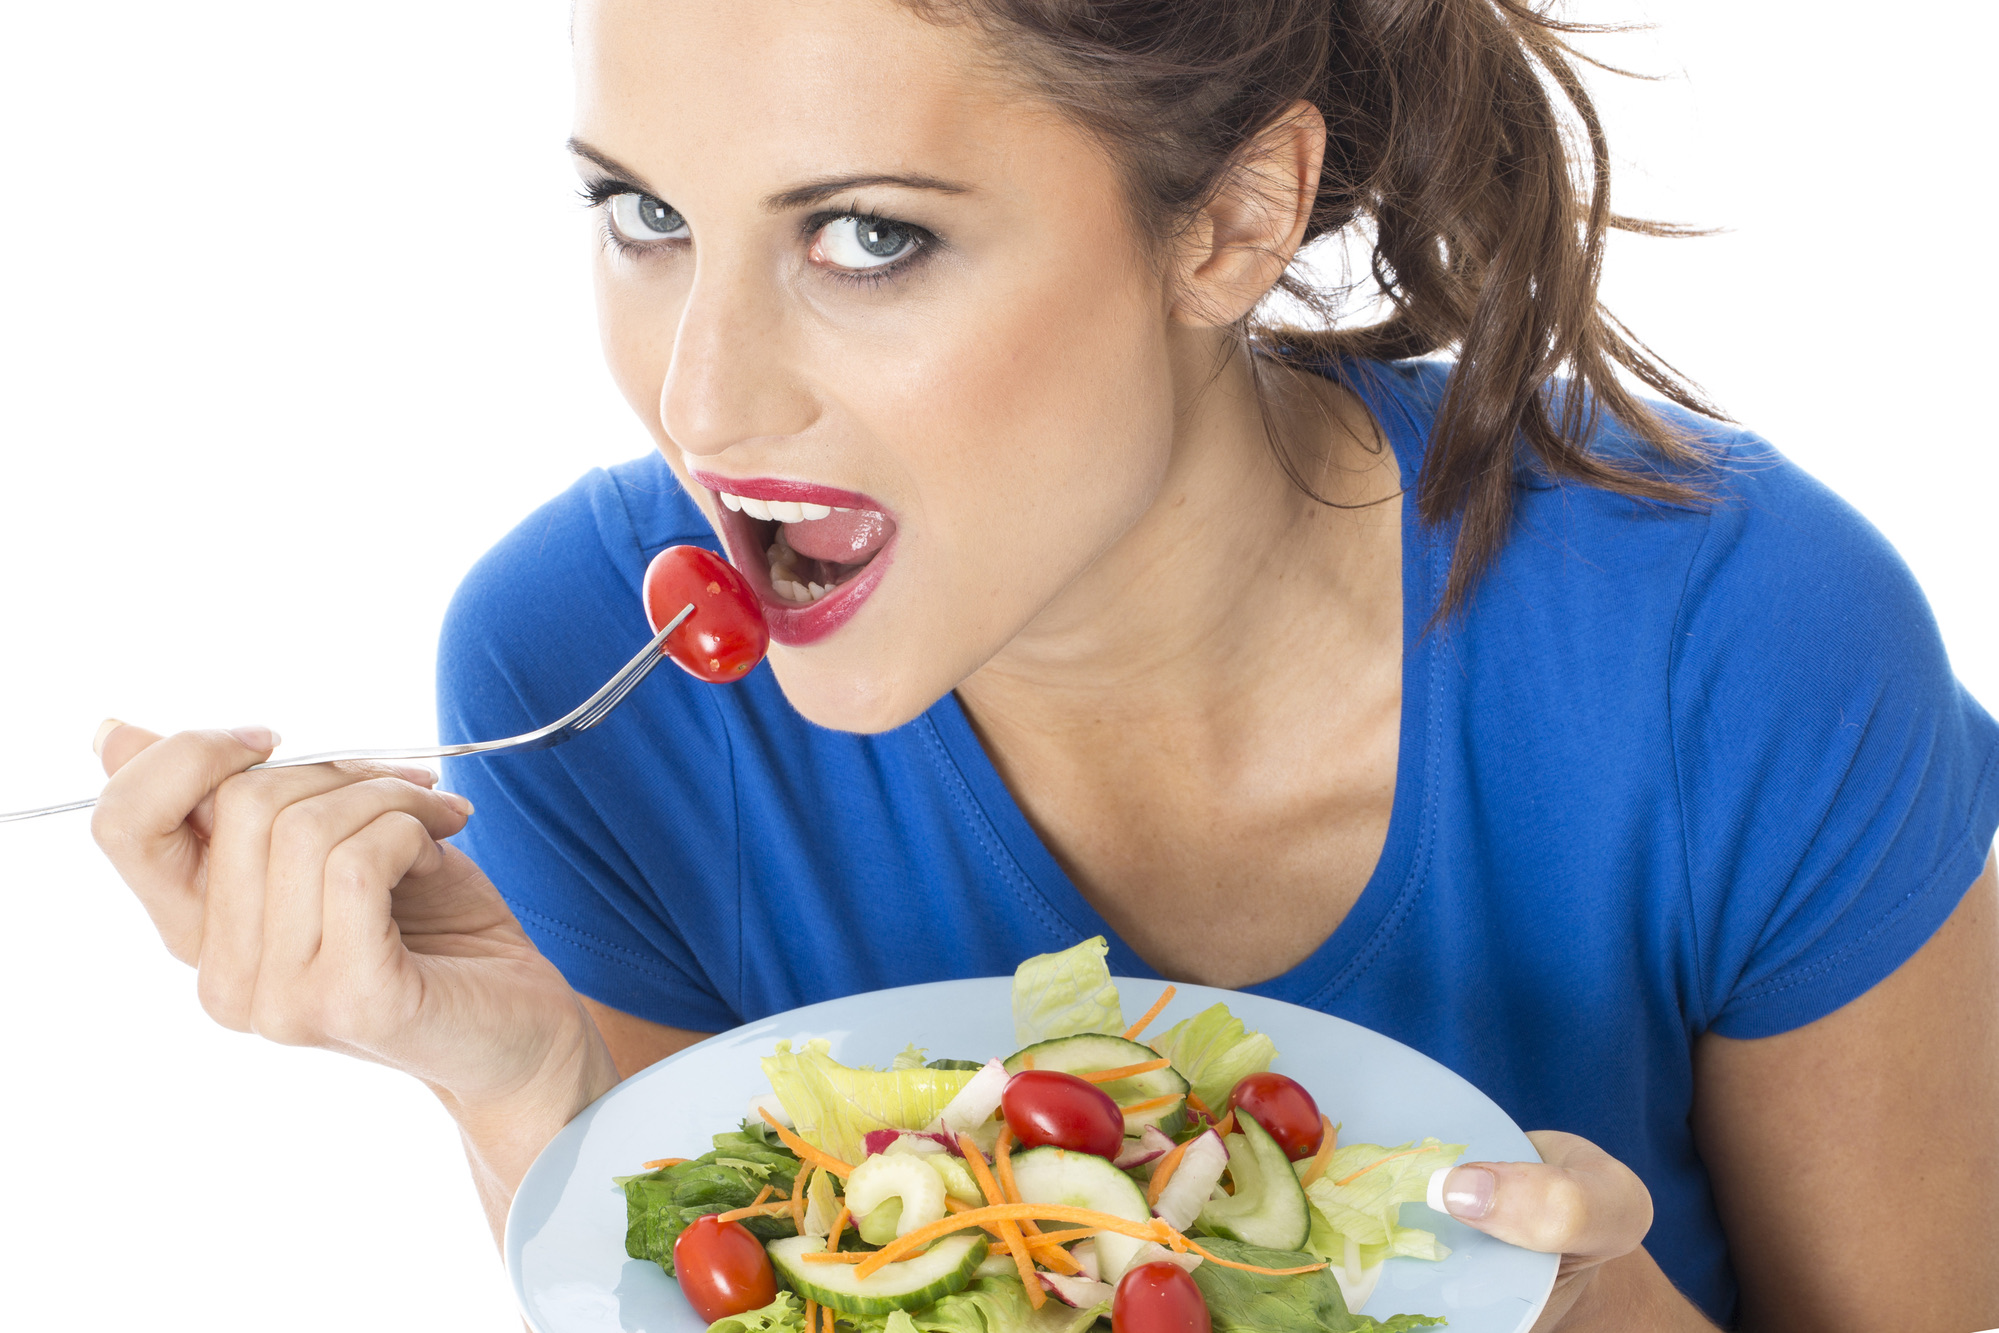 Model Released. Attractive Young Woman Eating Mixed Salad